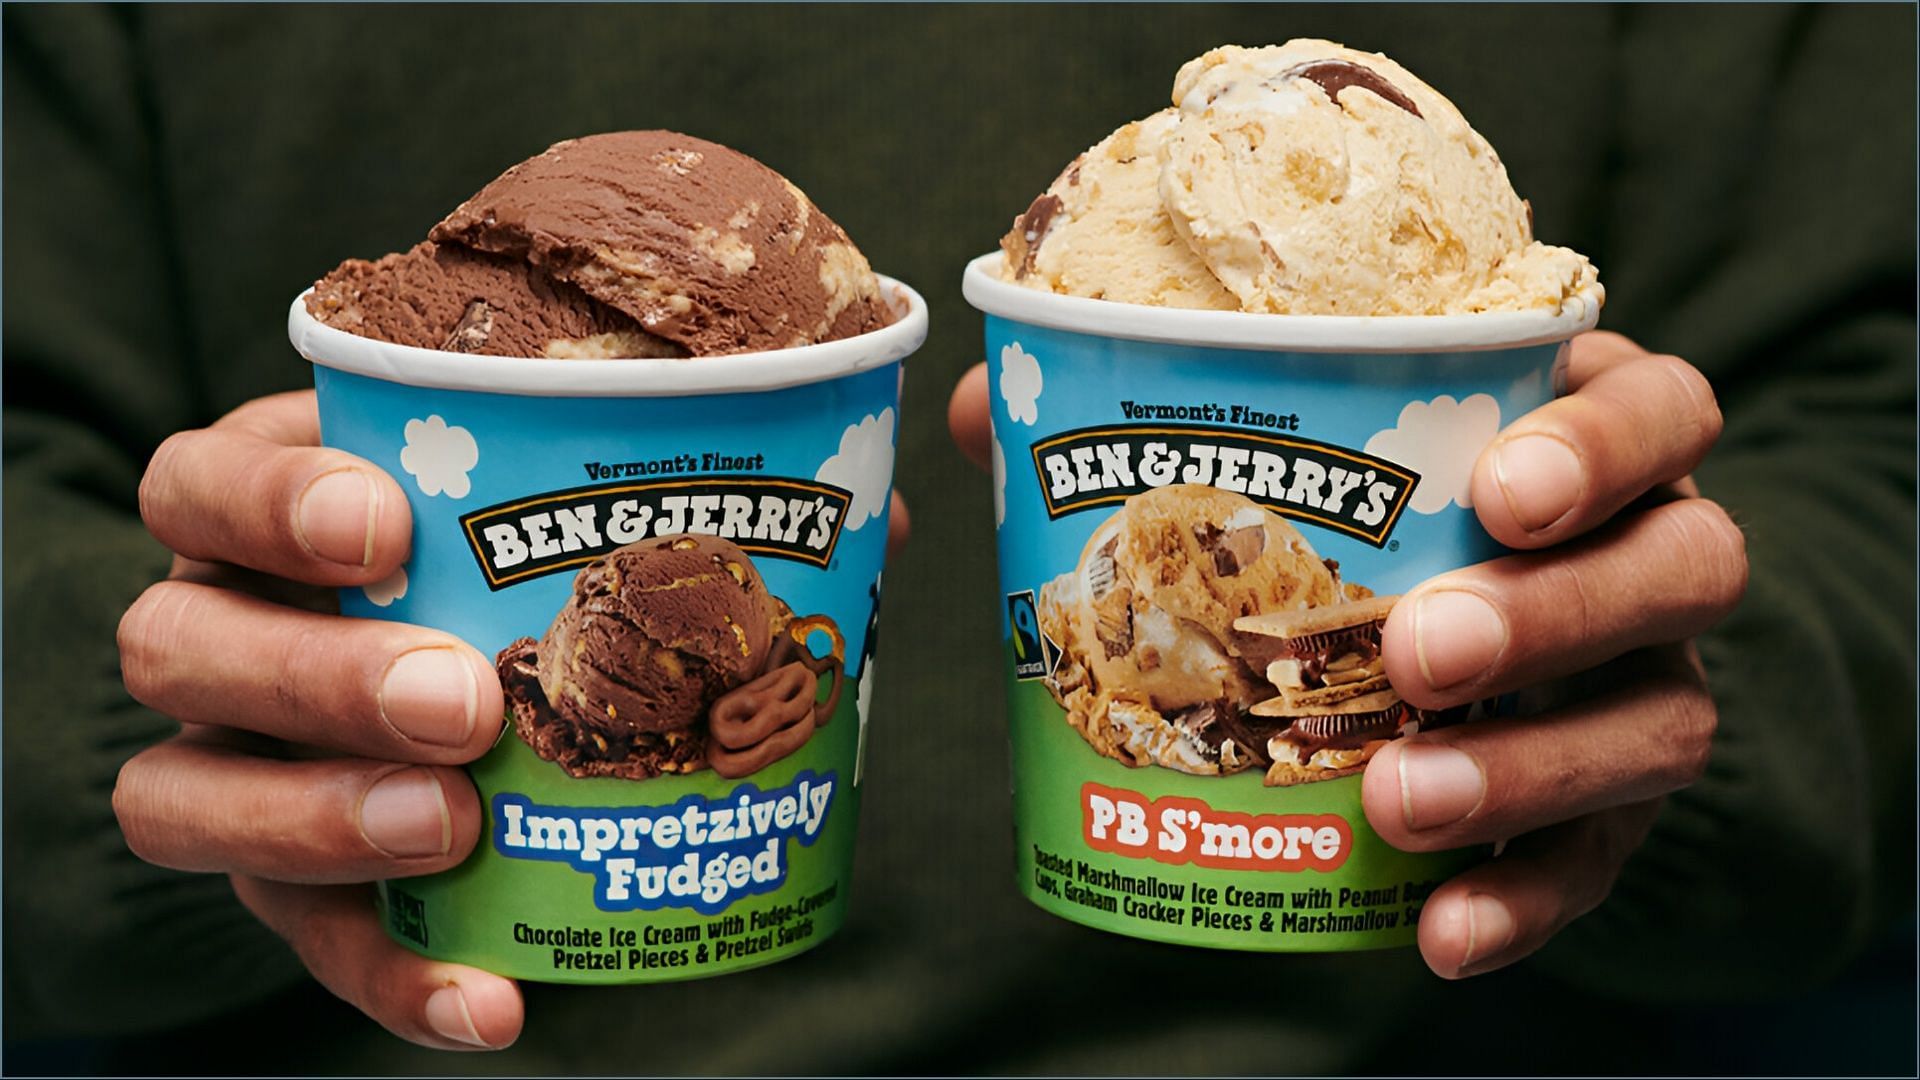 The Impretzively Fudged and PB S&rsquo;more flavors start at over $4.99 (Image via Ben &amp; Jerry&rsquo;s)